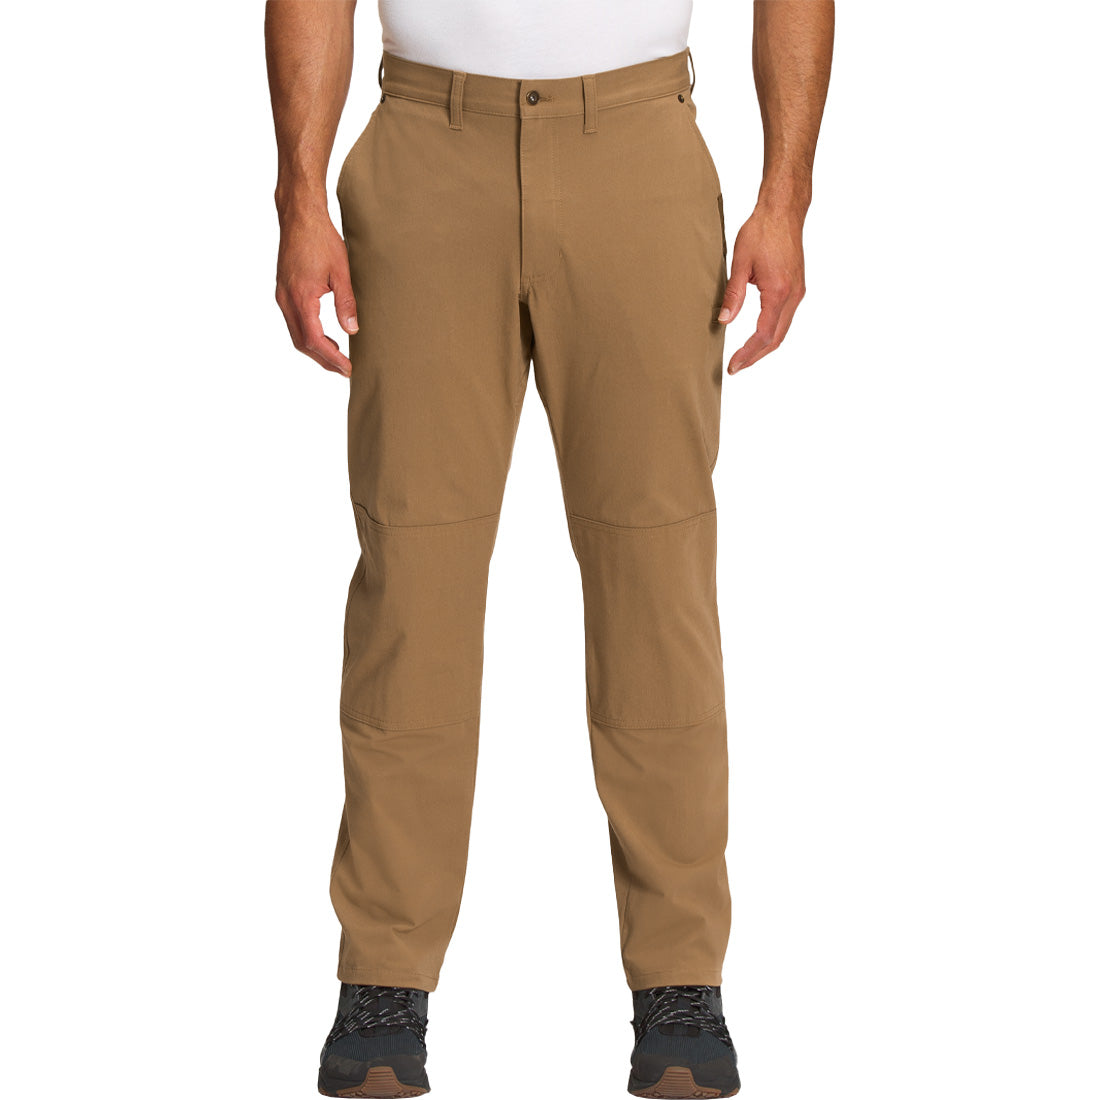 Hiking Pants] - Mens - The North Face (Utility Brown